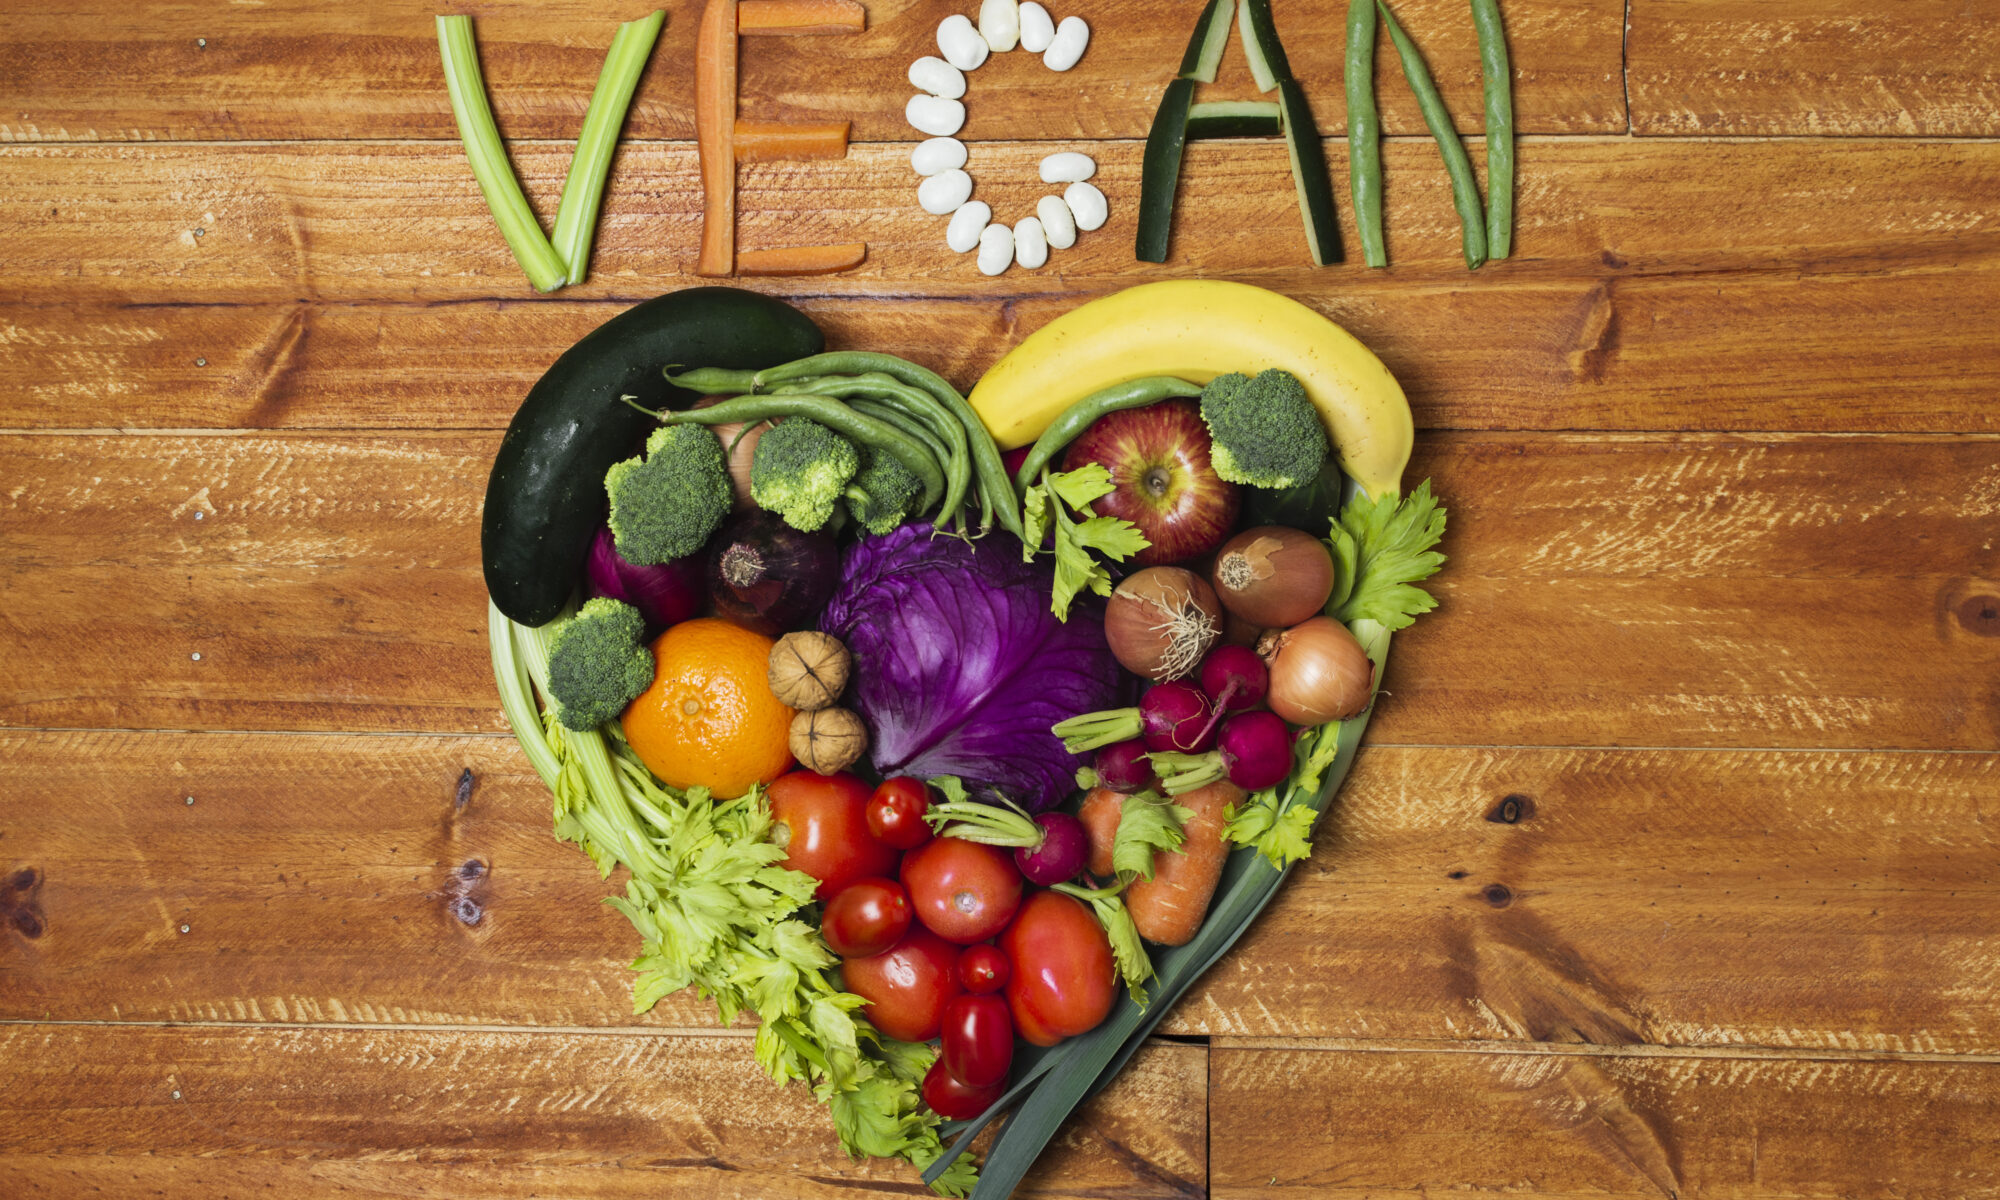 Bloom Nutrition are good for vegetarians and vegans